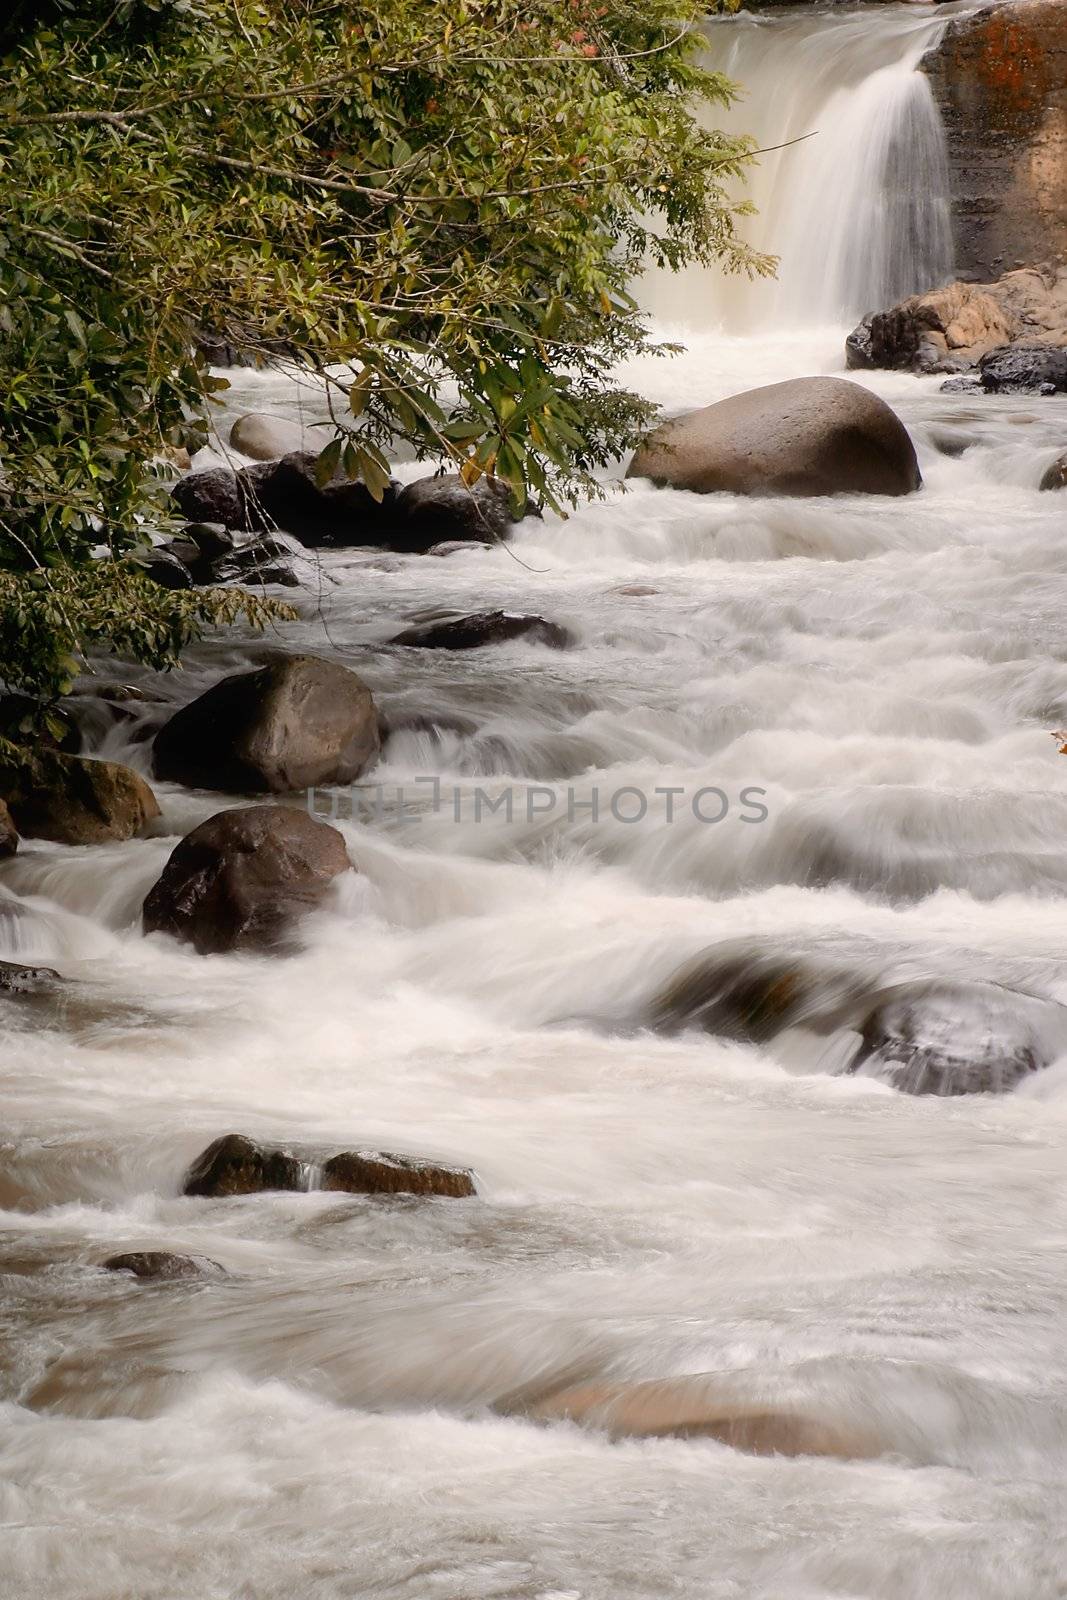 Small river in Costa Rica tumbles over rocks.  Slow shutter speed blurs the motion.